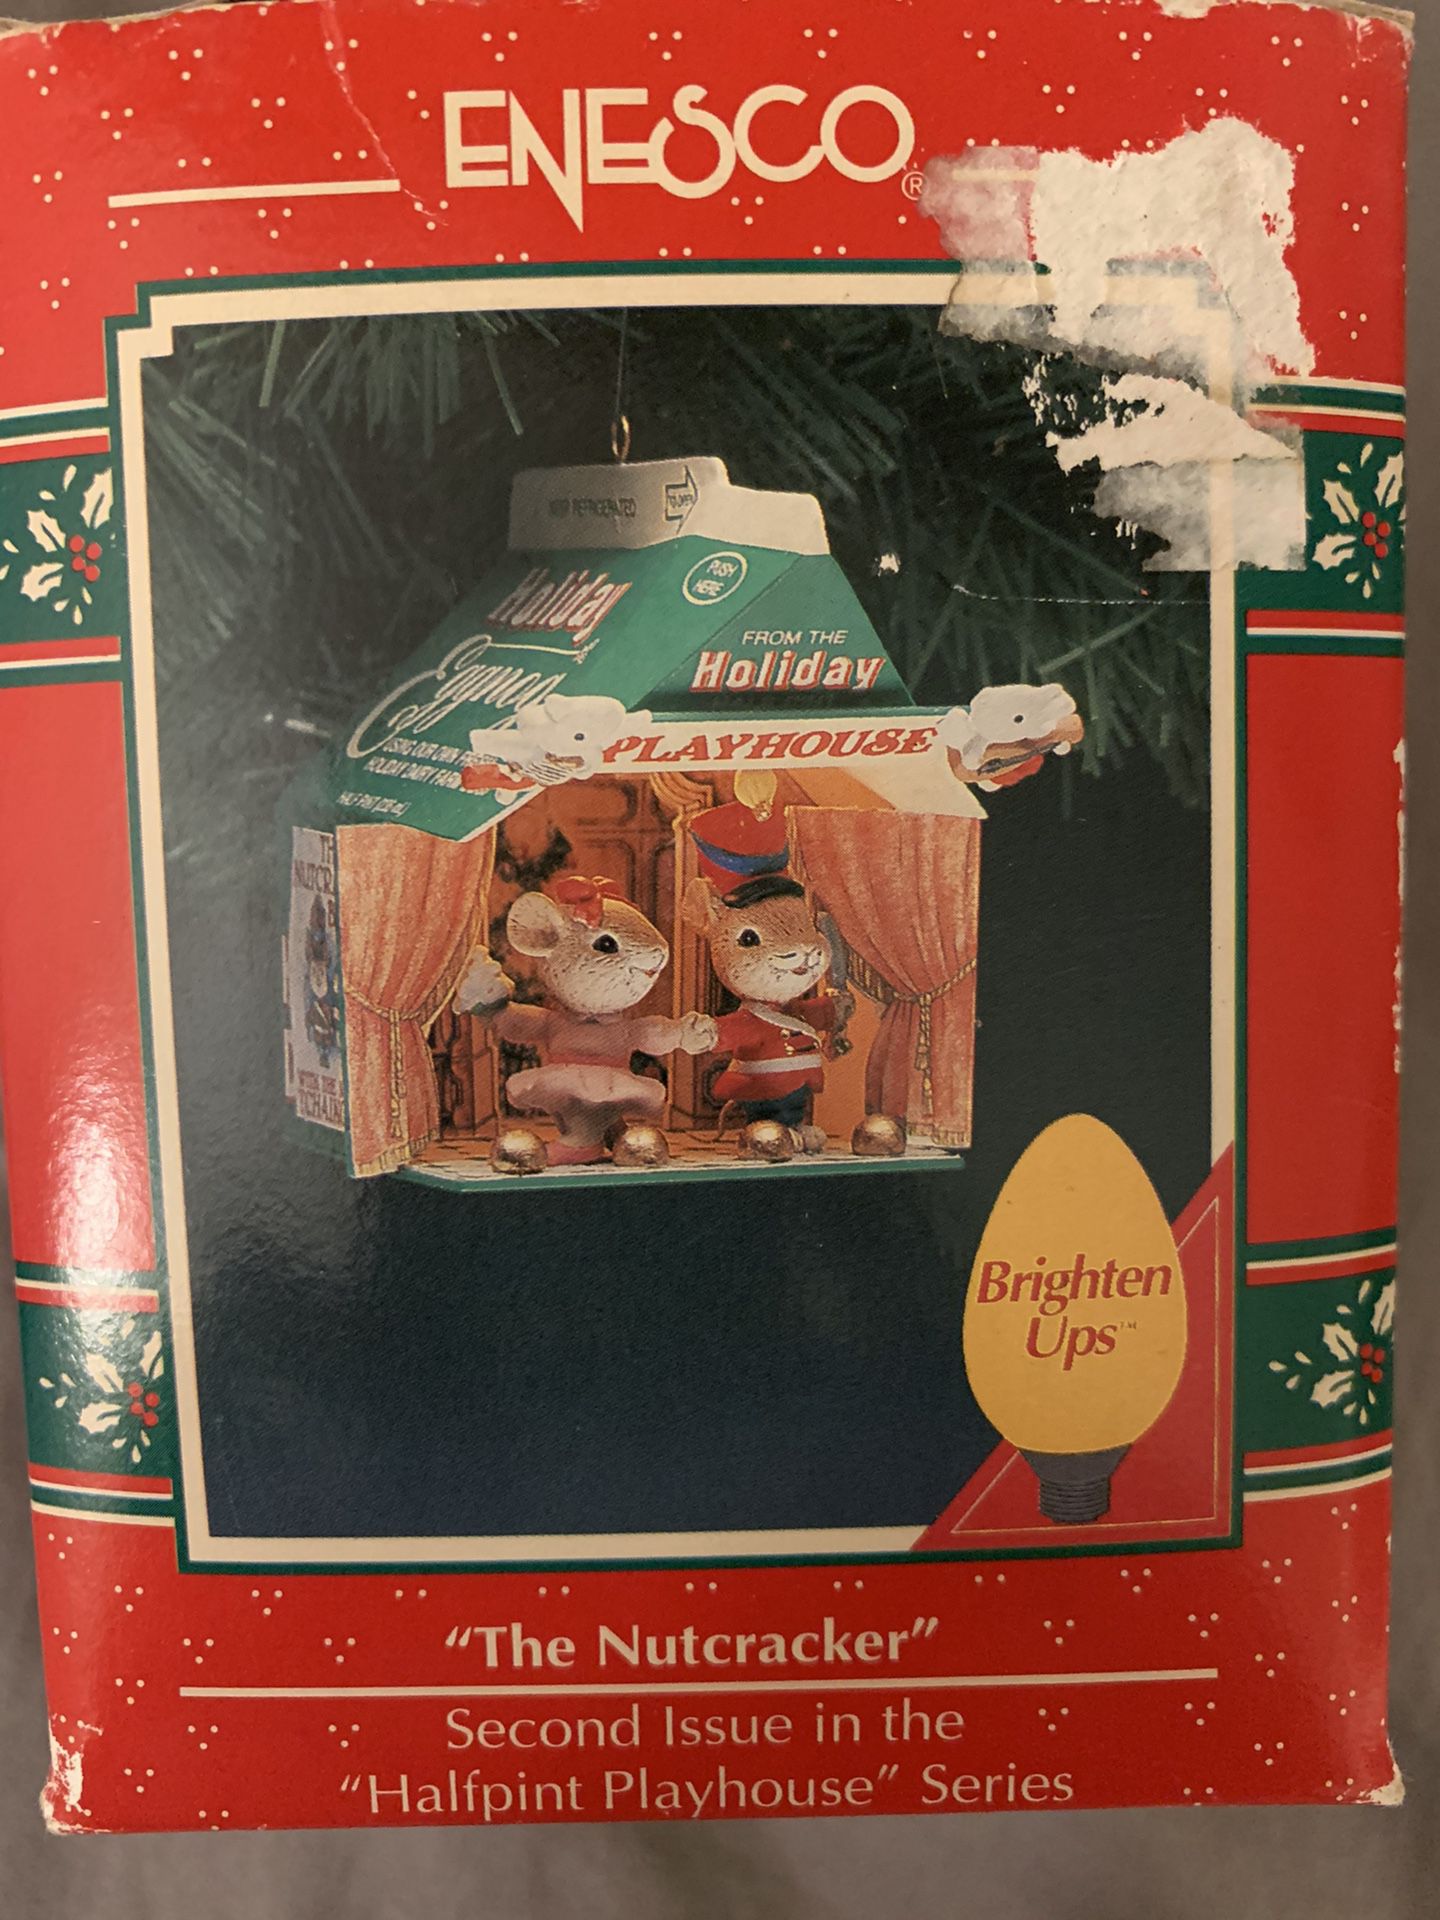 RARE 1992 ENESCO “THE NUTCRACKER” ORNAMENT - 2ND ISSUE IN THE “HALFPINT PLAYHOUSE” SERIES